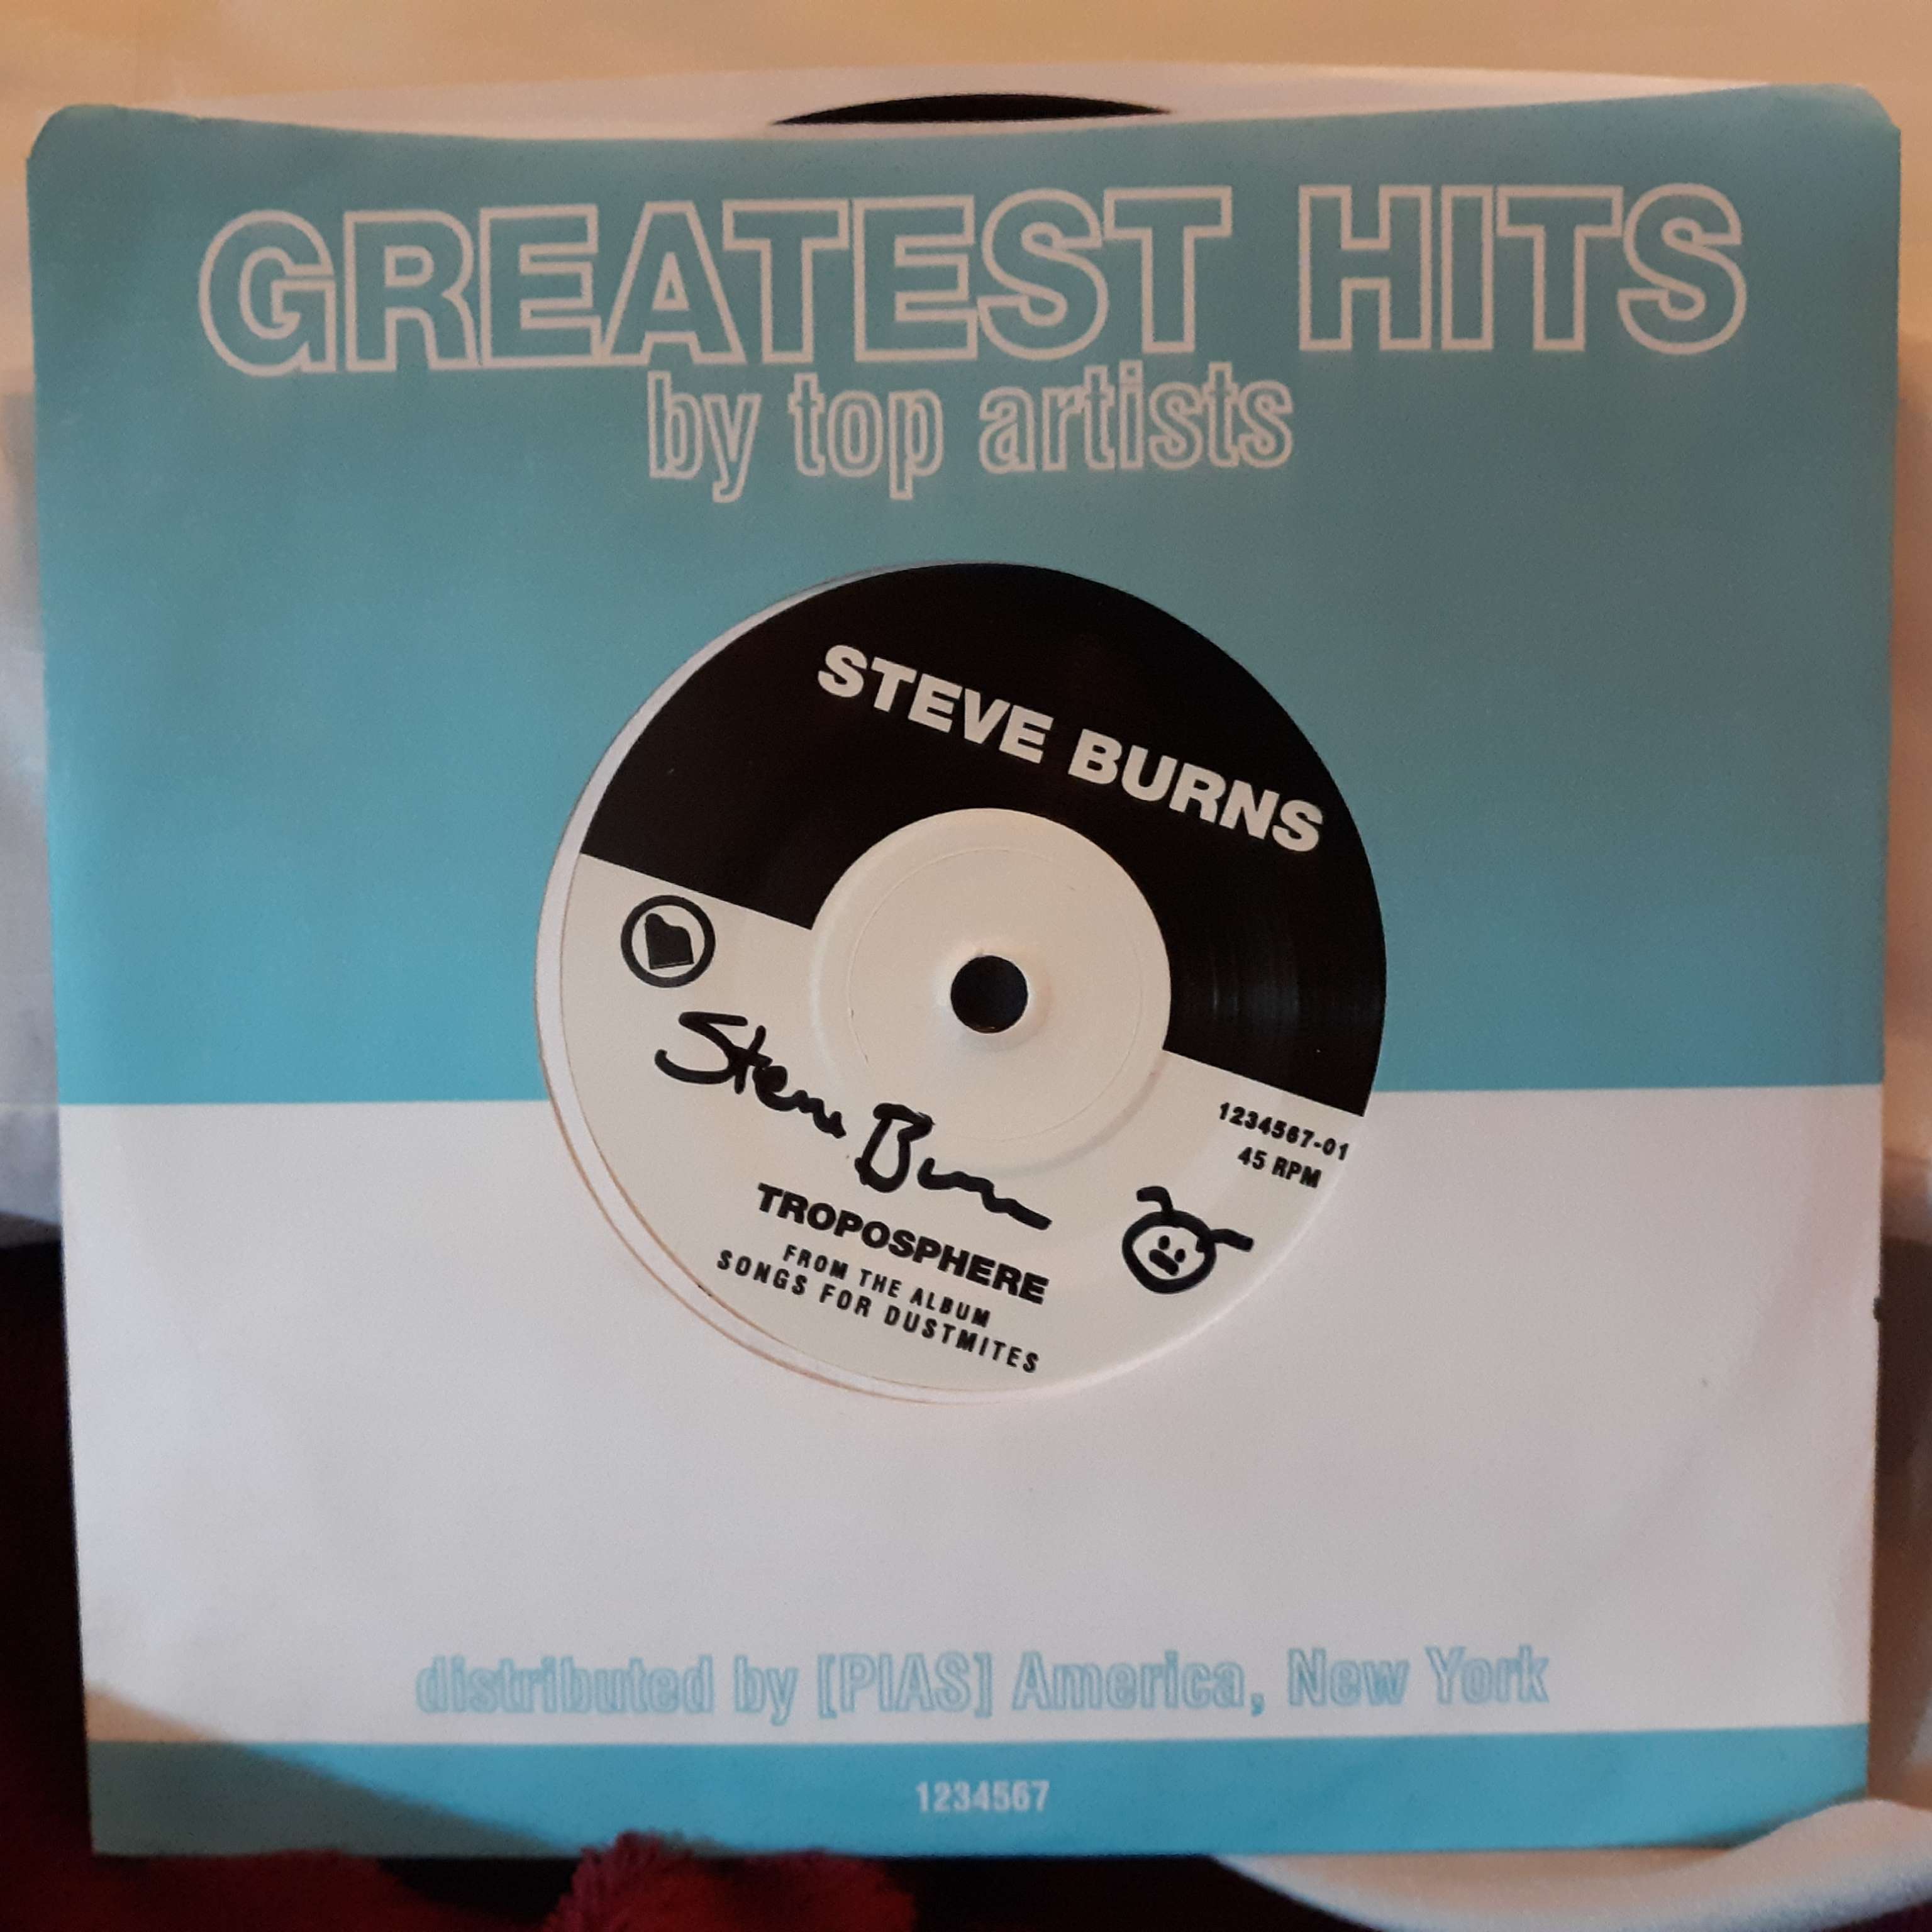 A seven inch single within its paper slip. The paper slip says 'Greatest Hits by top artists' on the top with 'distributed by PIAS America, New York' on the bottom. The label on the single itself says 'Steve Burns' on the top with 'Troposphere from the album Songs For Dustmites' on the bottom. Steve Burns' signature is in between them with a drawn dustmite next to his name.